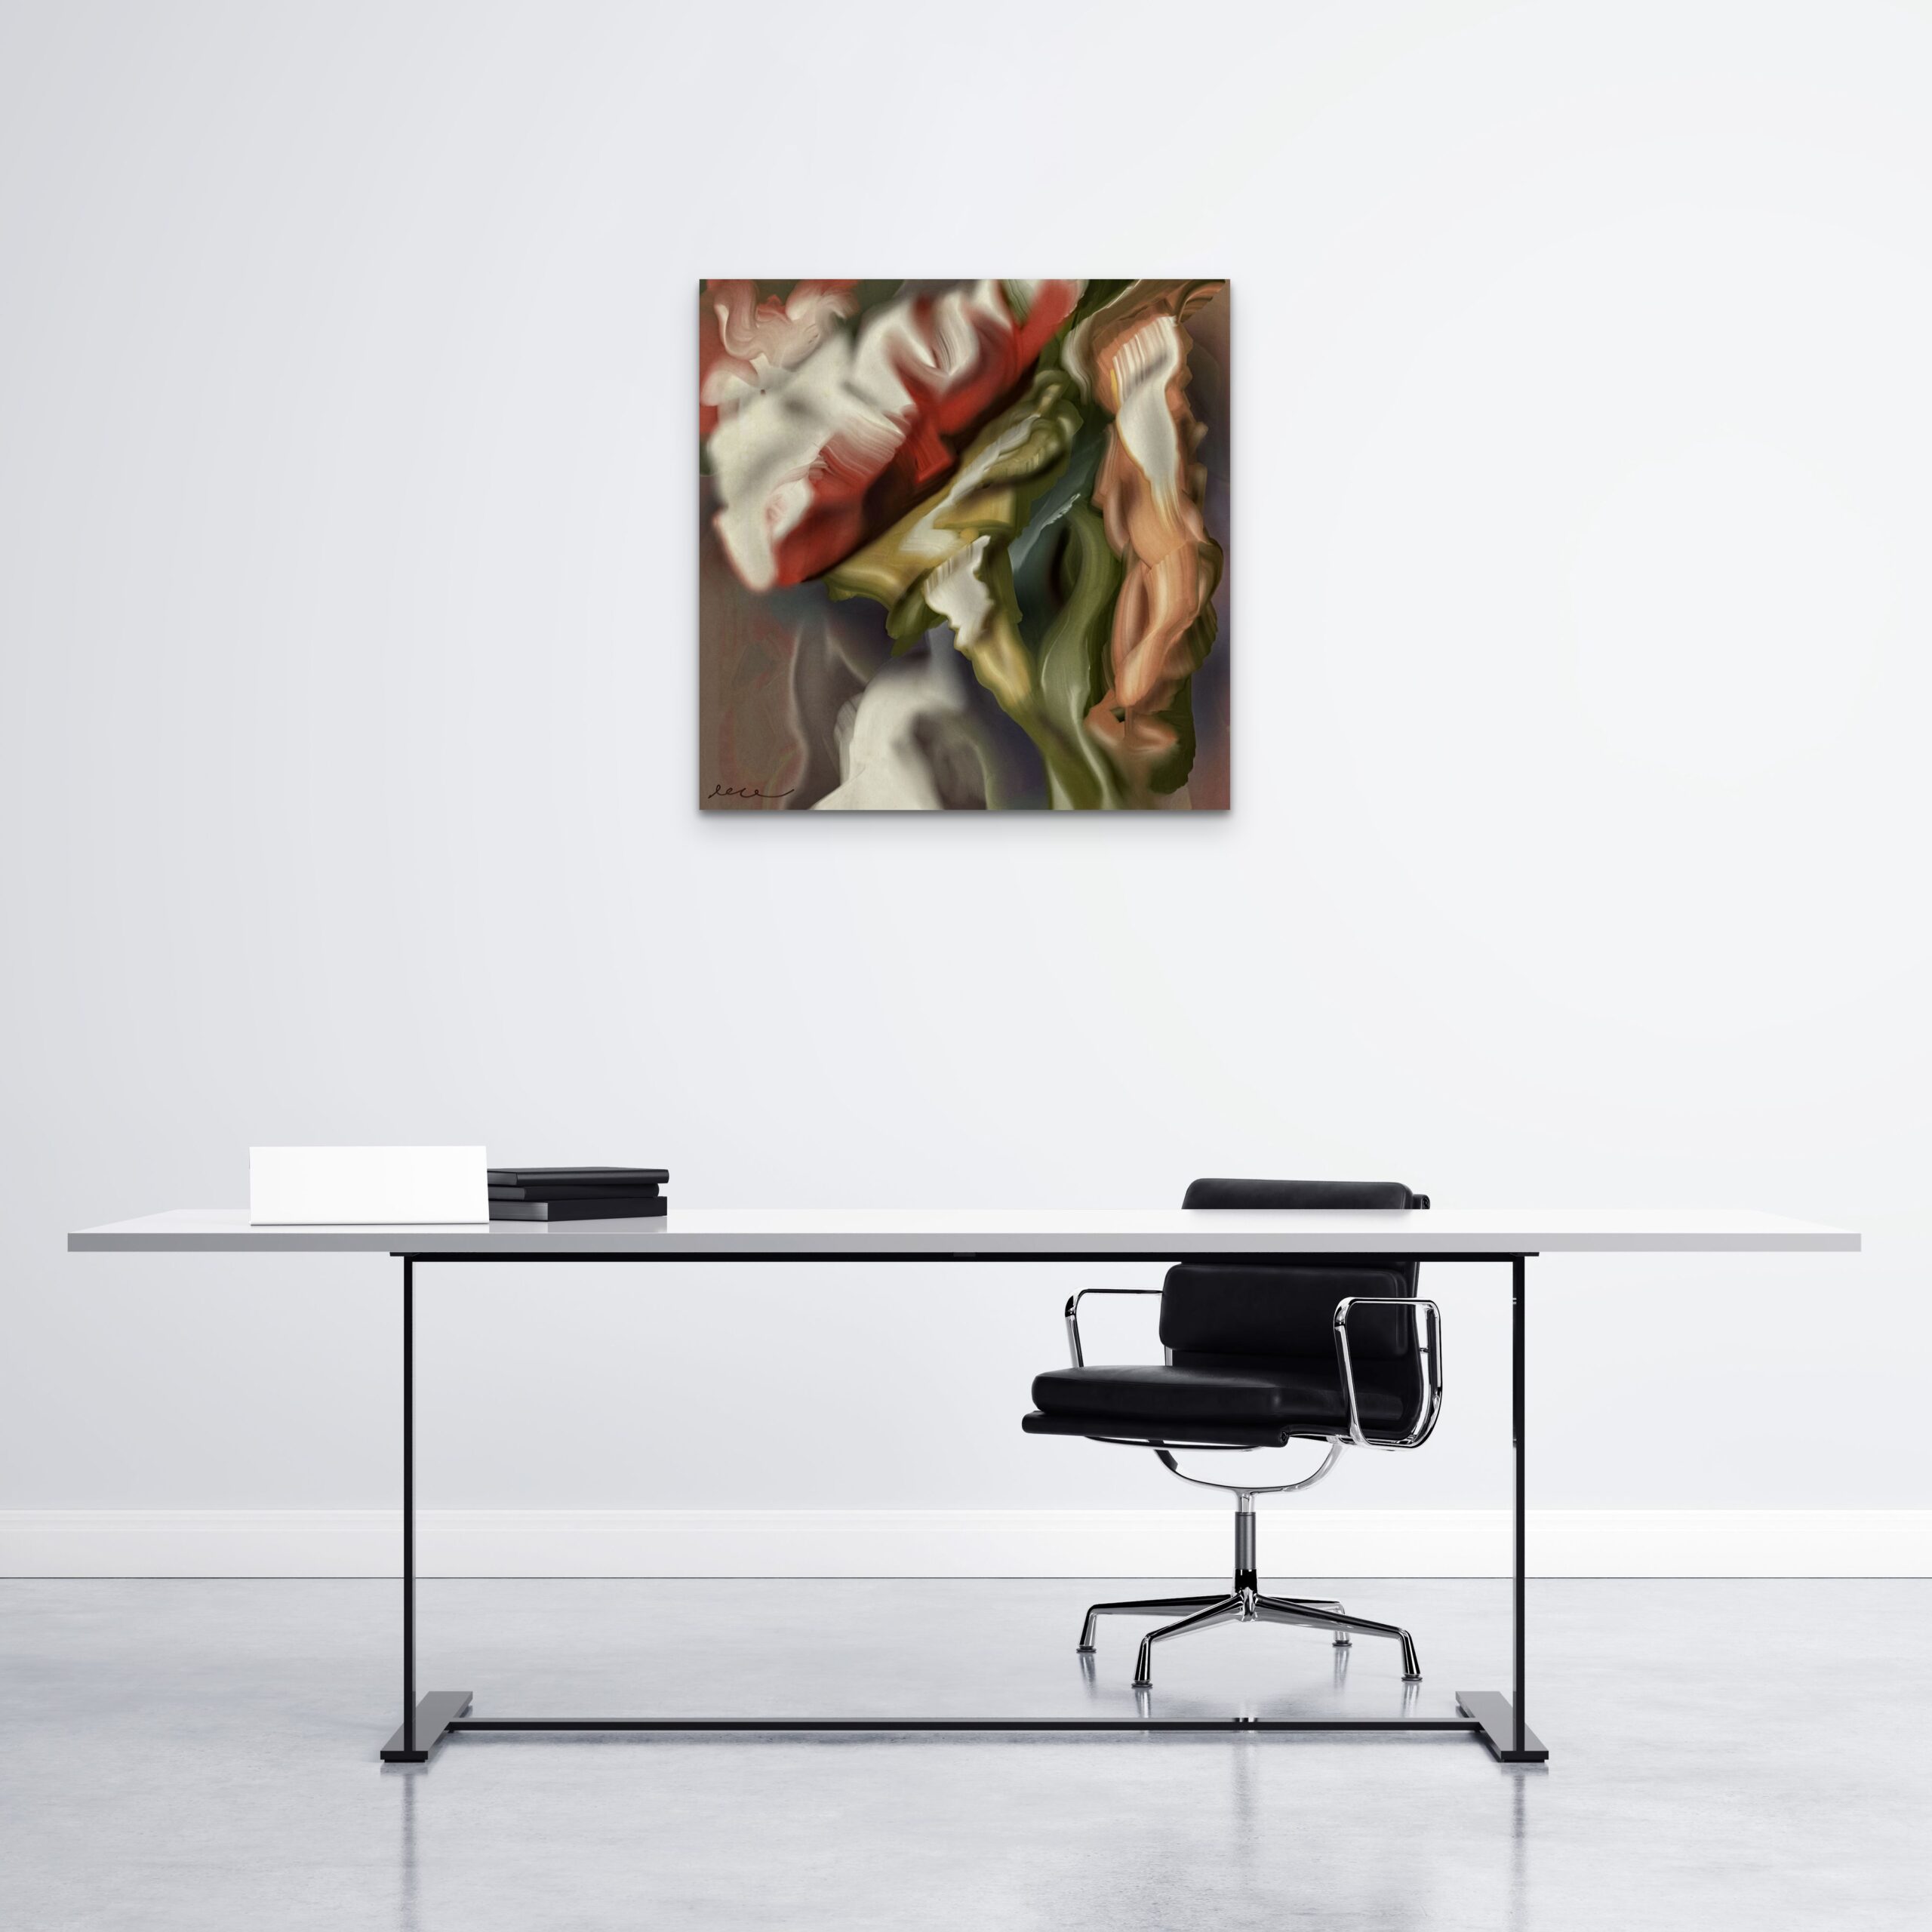 An artwork measuring 24 x 24 inches displayed in an office setting. The colourful piece adds a touch of creativity and vibrancy to the workspace, enhancing the overall aesthetic appeal.